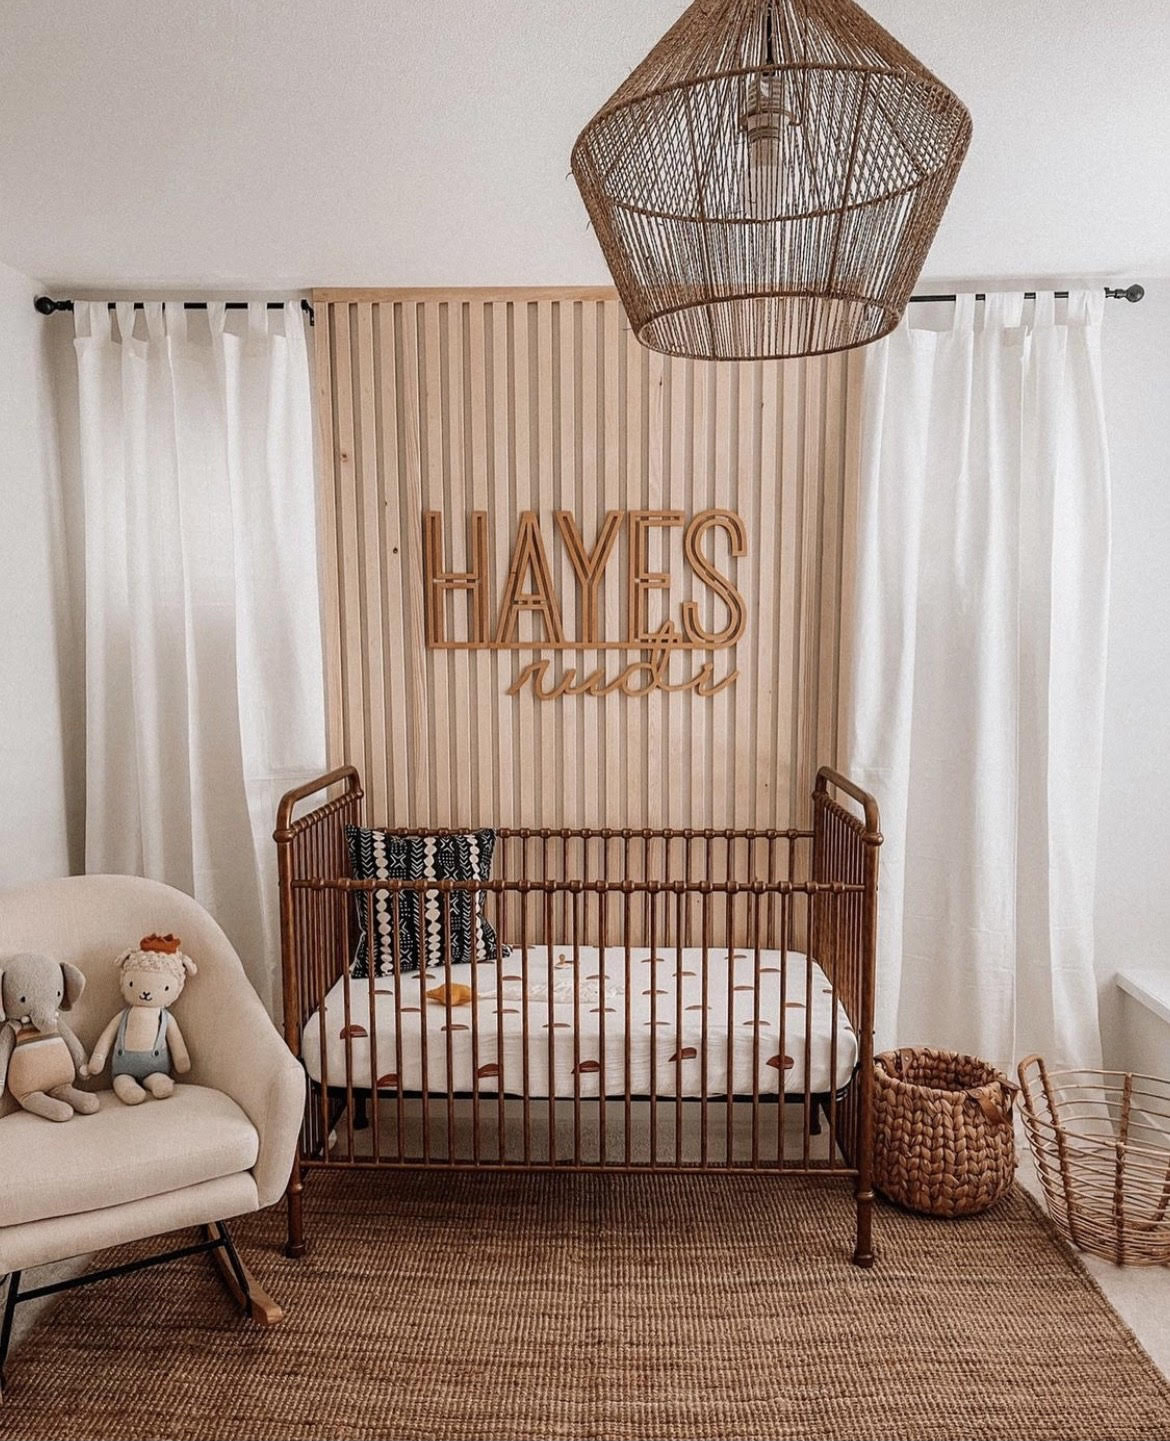 Nursery Design: How to get started